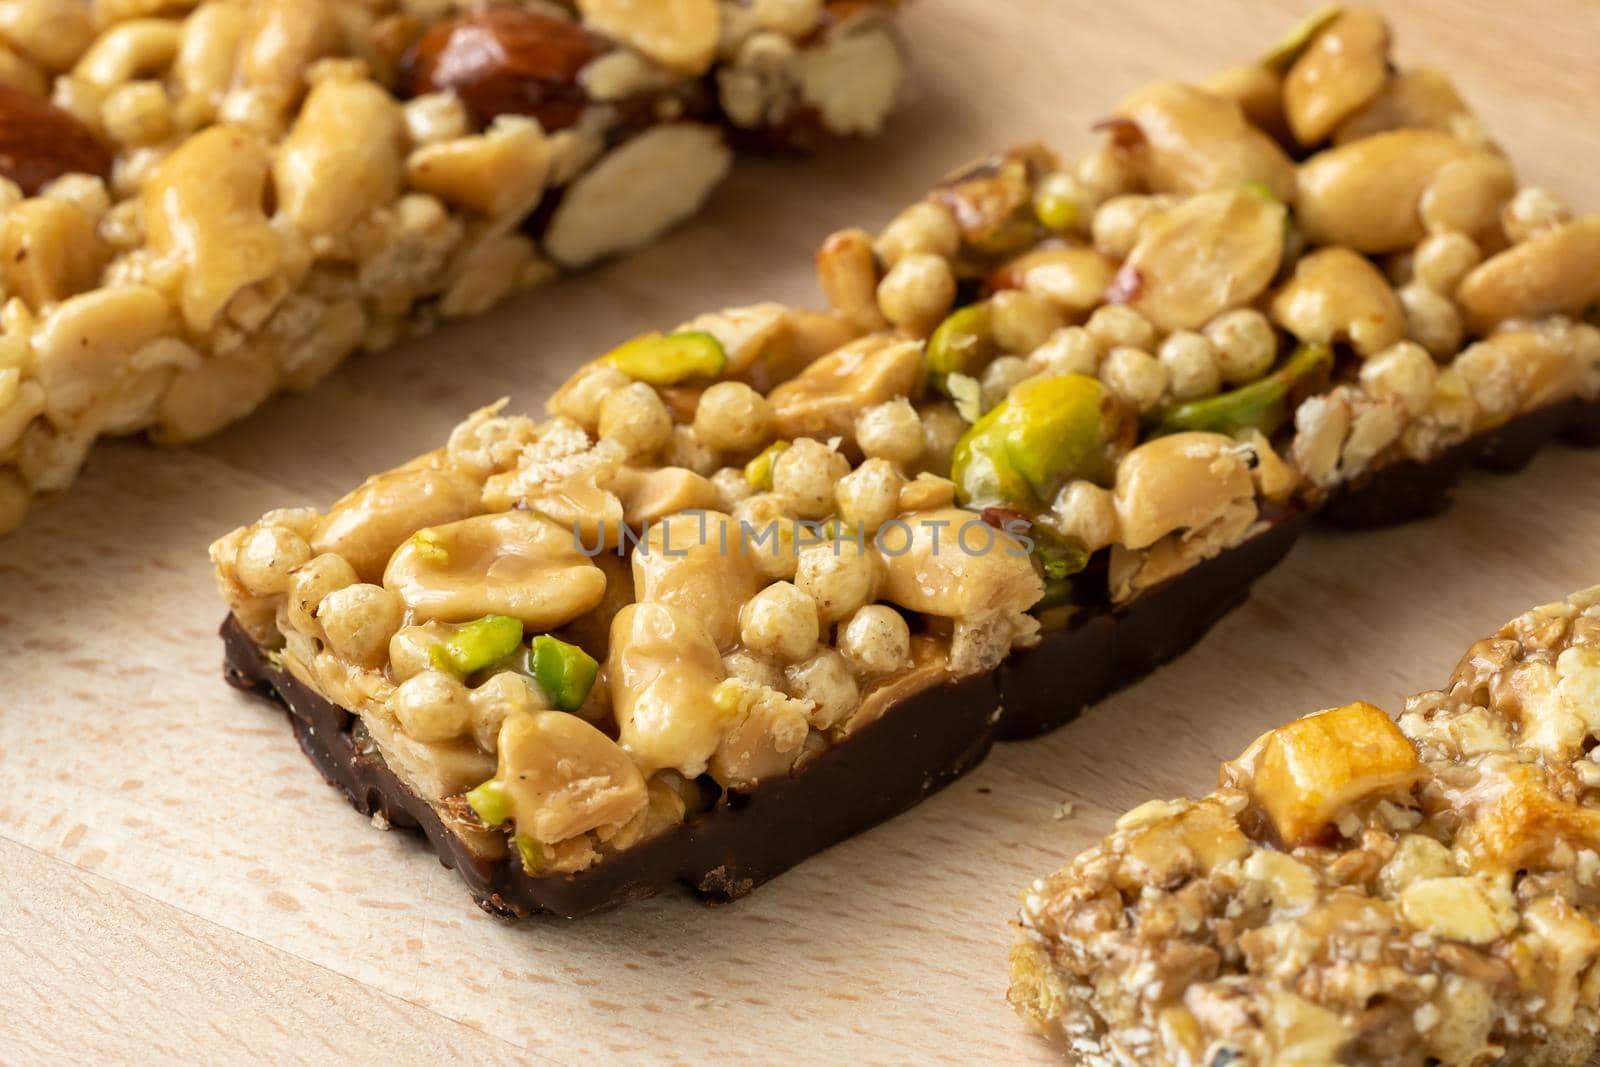 Cereal superfood energy bars with almond nuts, dry fruits, raisins chocolate on the wood table